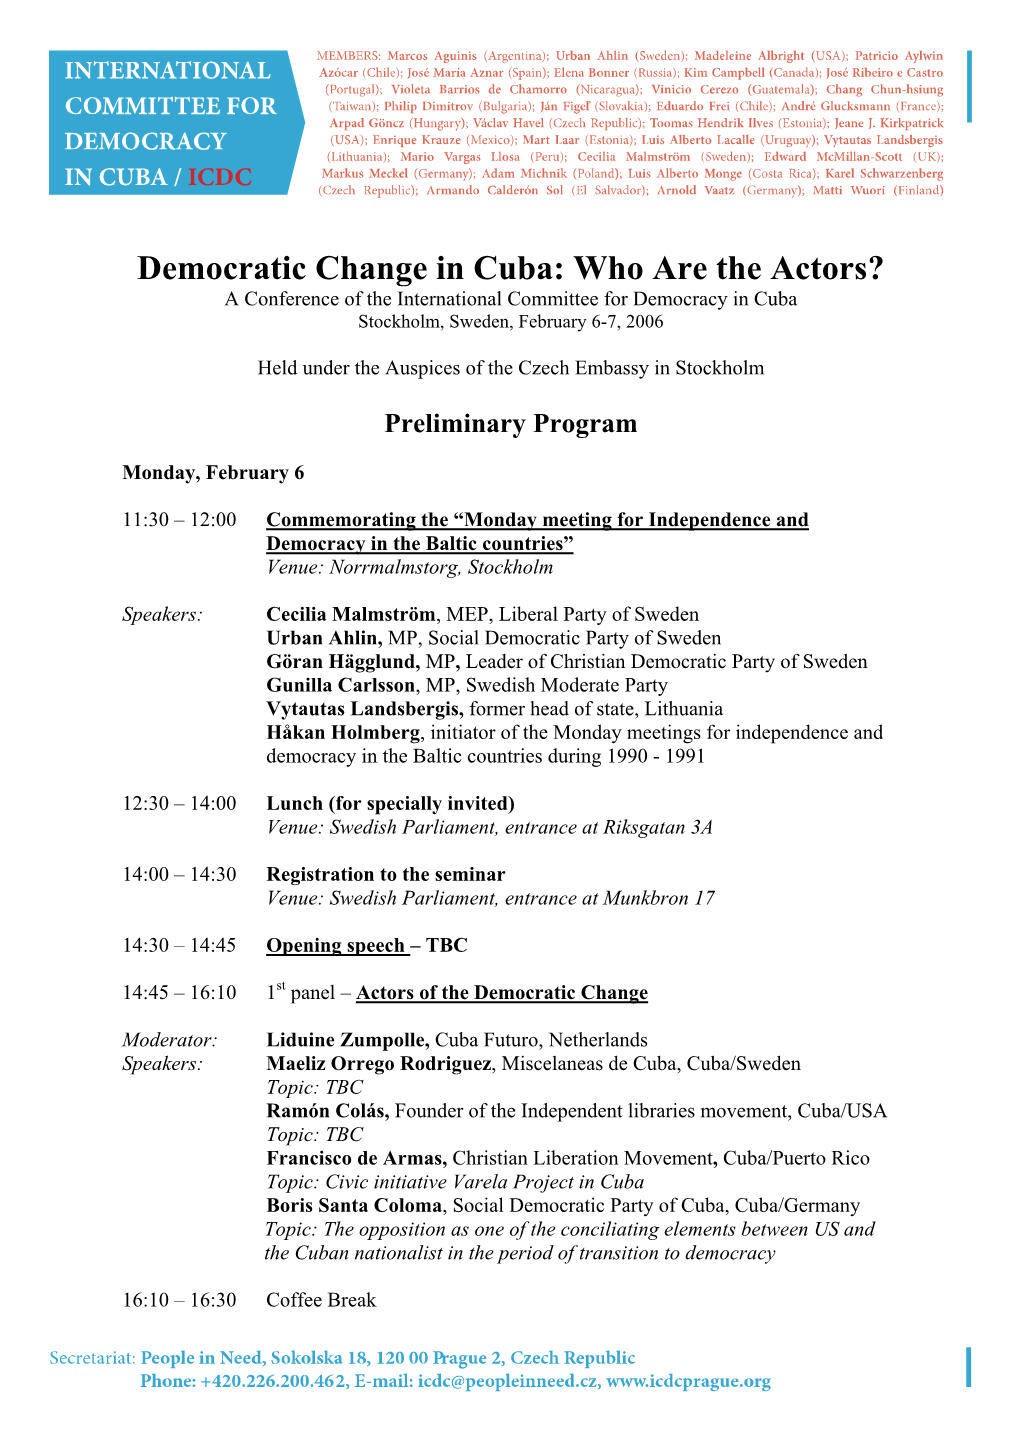 Democratic Change in Cuba: Who Are the Actors? a Conference of the International Committee for Democracy in Cuba Stockholm, Sweden, February 6-7, 2006